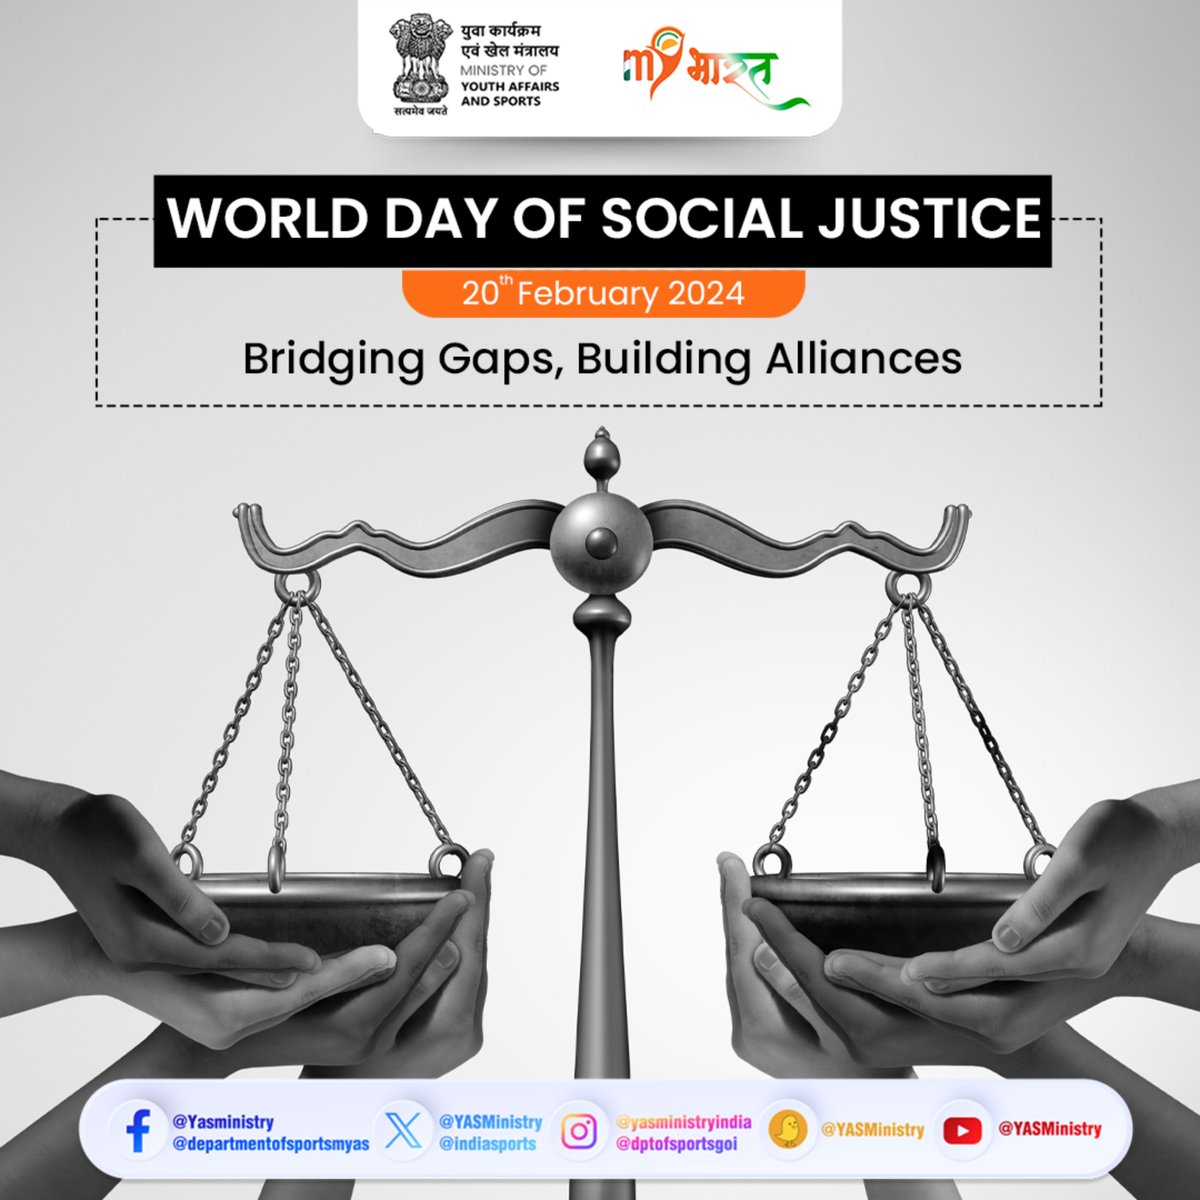 On this #WorldDayofSocialJustice, let's amplify our commitment to promote social justice & tackle issues like poverty, exclusion, gender inequality, unemployment, human rights & social protection. It's time to build a world where fairness prevails in more equitable societies.⚖️